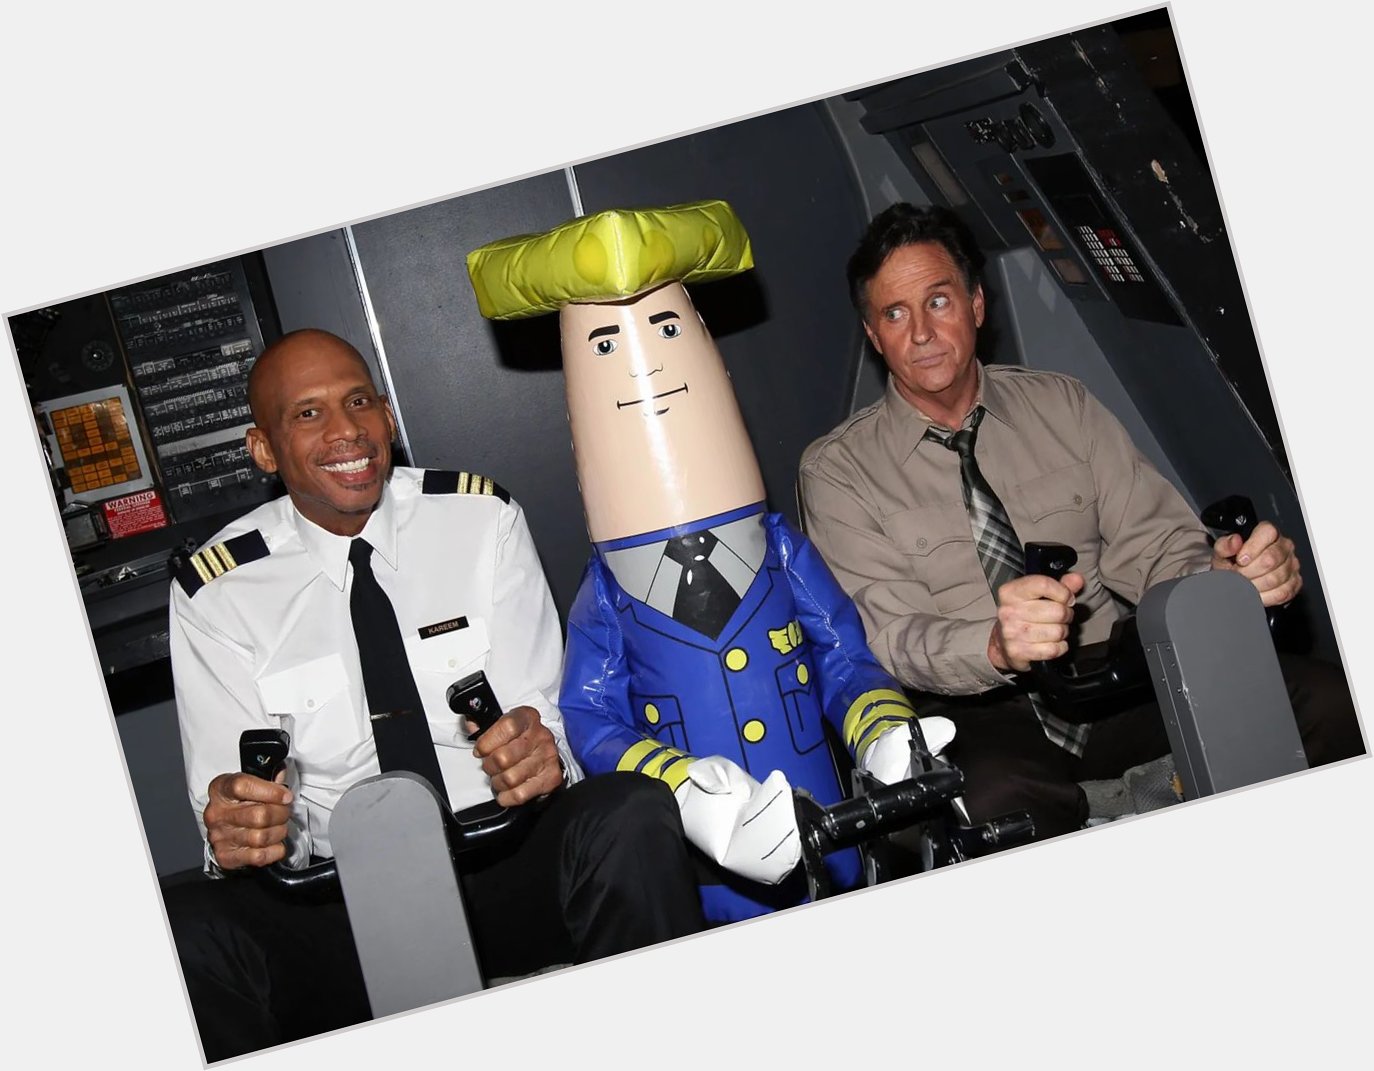 The time when Kareem Abdul Jabbar and Robert Hays reunited for a commercial. 

Happy 42nd birthday Airplane! 